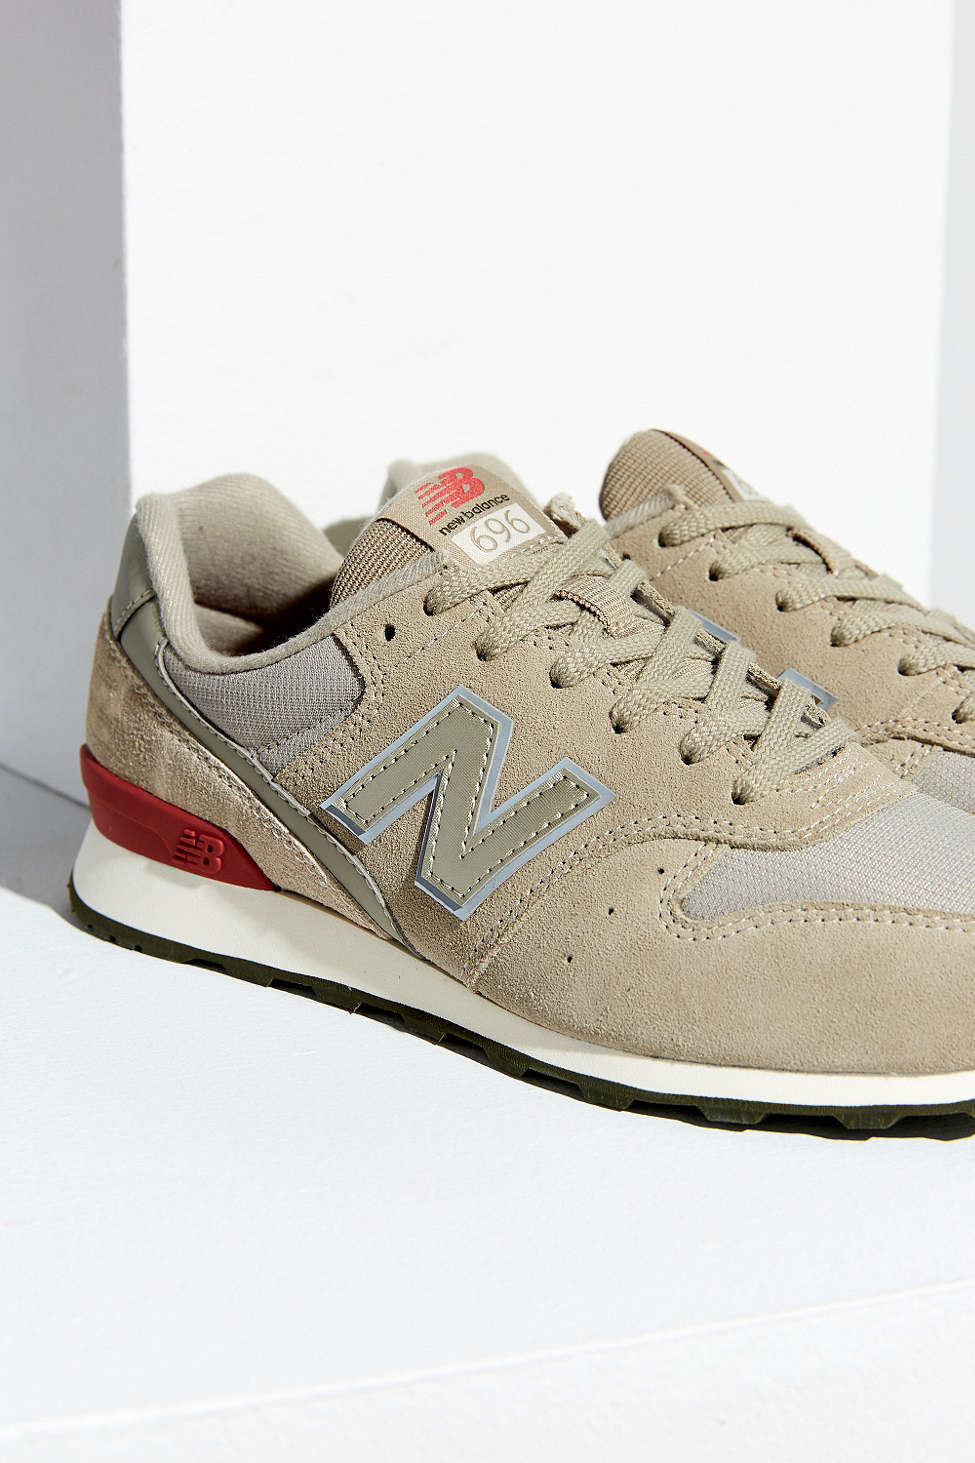 new balance 696 urban outfitters